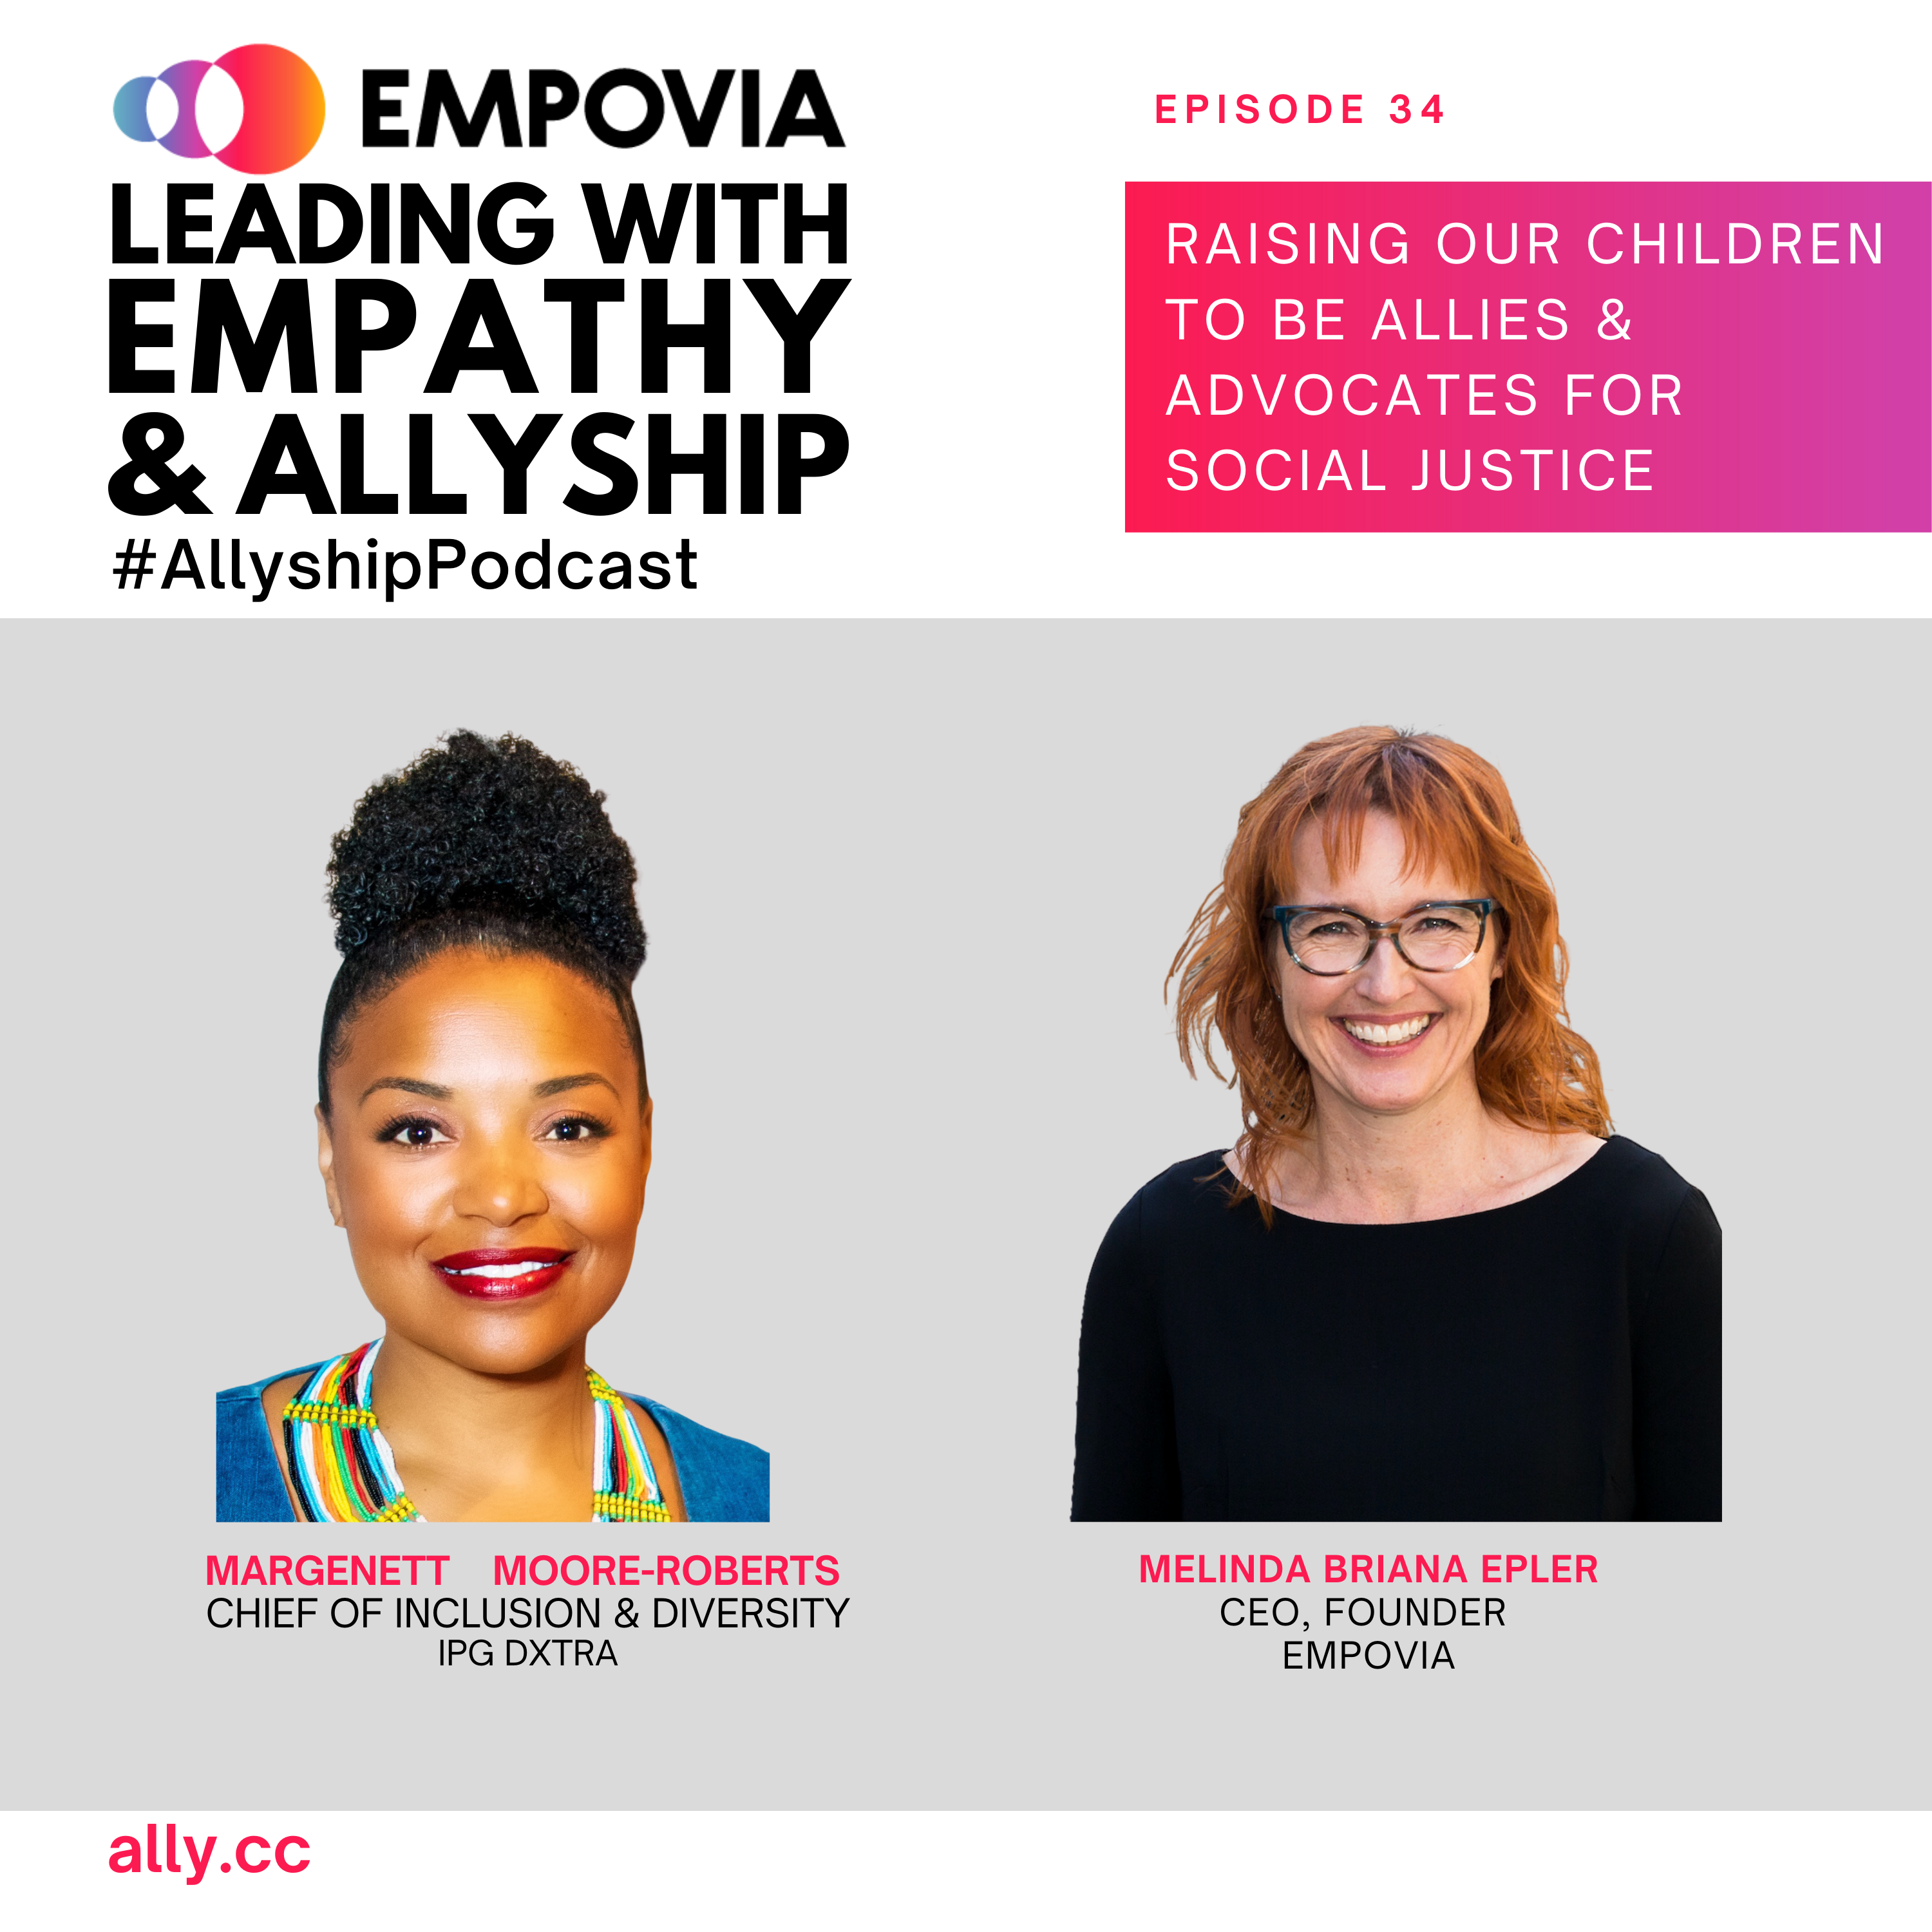 Leading With Empathy & Allyship promo with the Empovia logo and photos of host Melinda Briana Epler, a White woman with red hair and glasses, and Margenett Moore-Roberts, a Black woman with a curly black bun and hoop earrings.